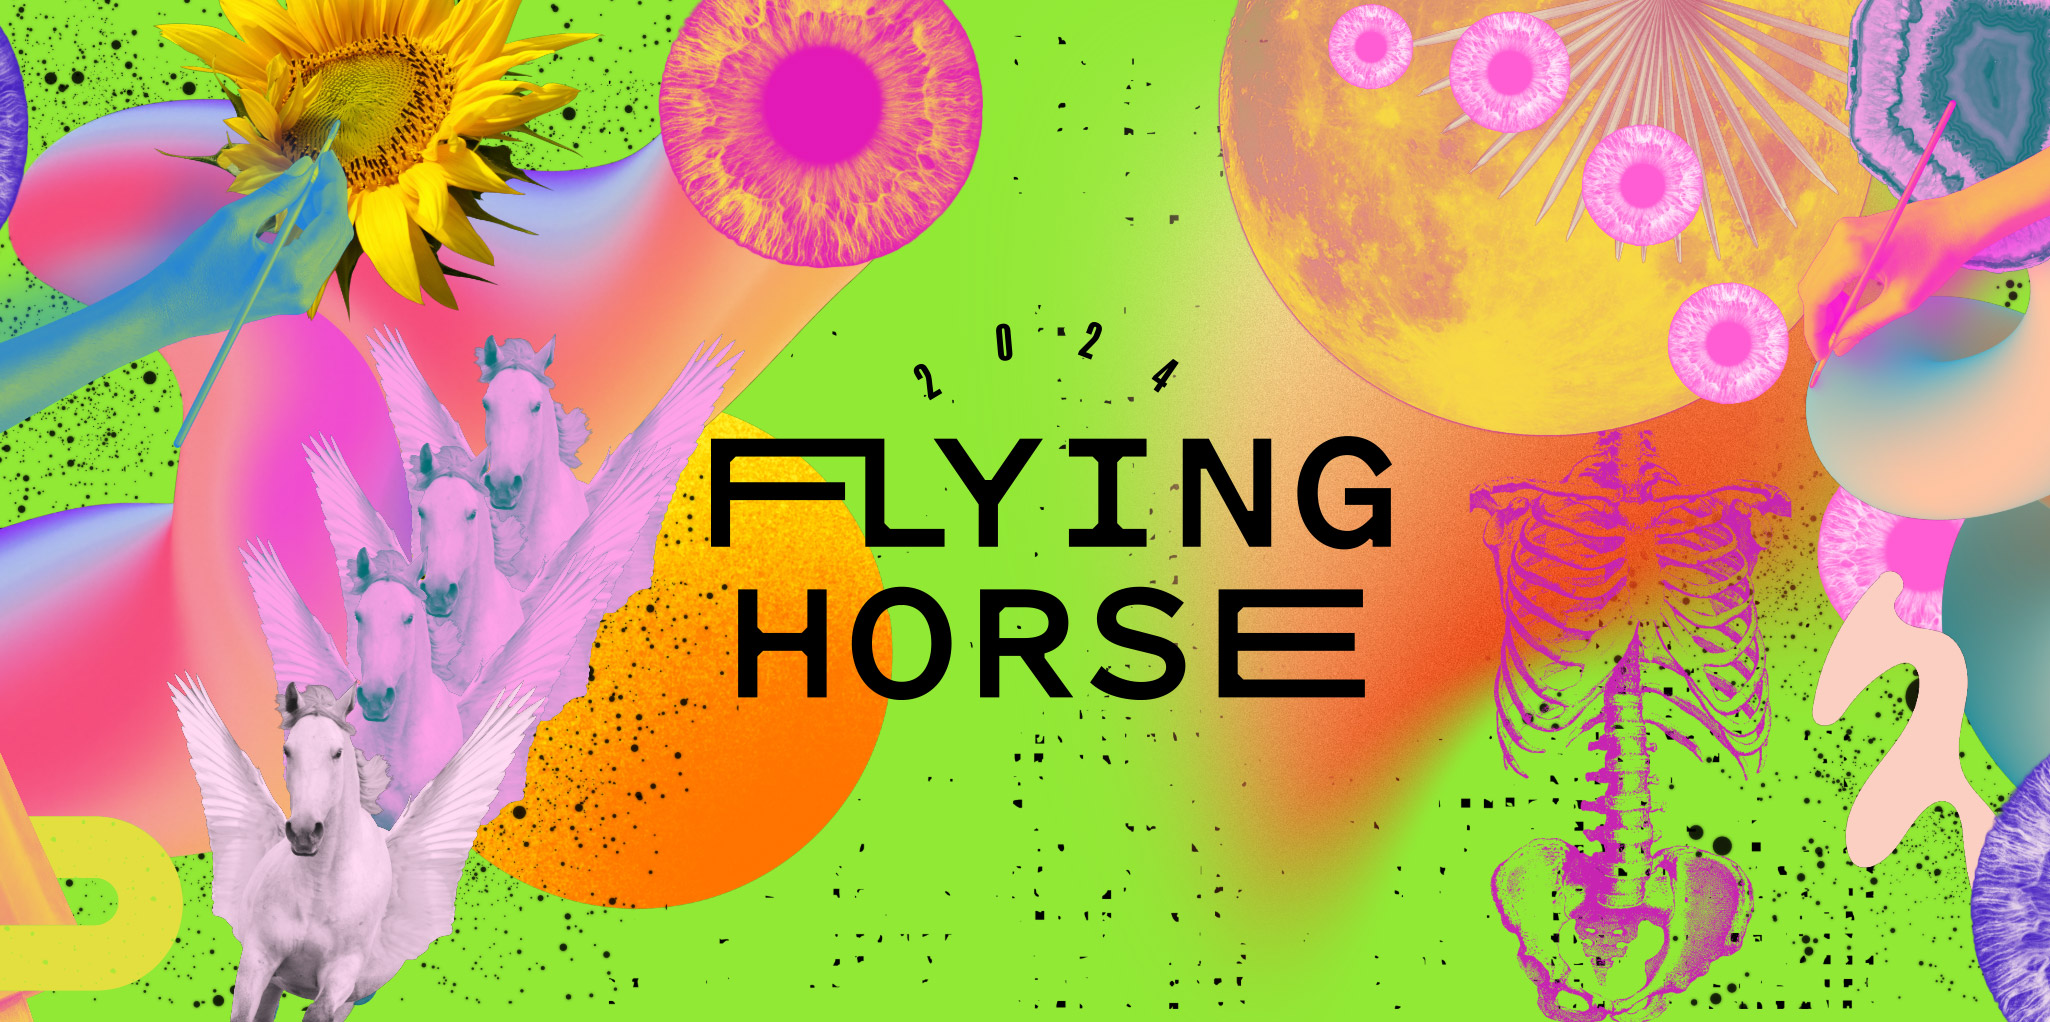 Flying Horse Event Save the Date